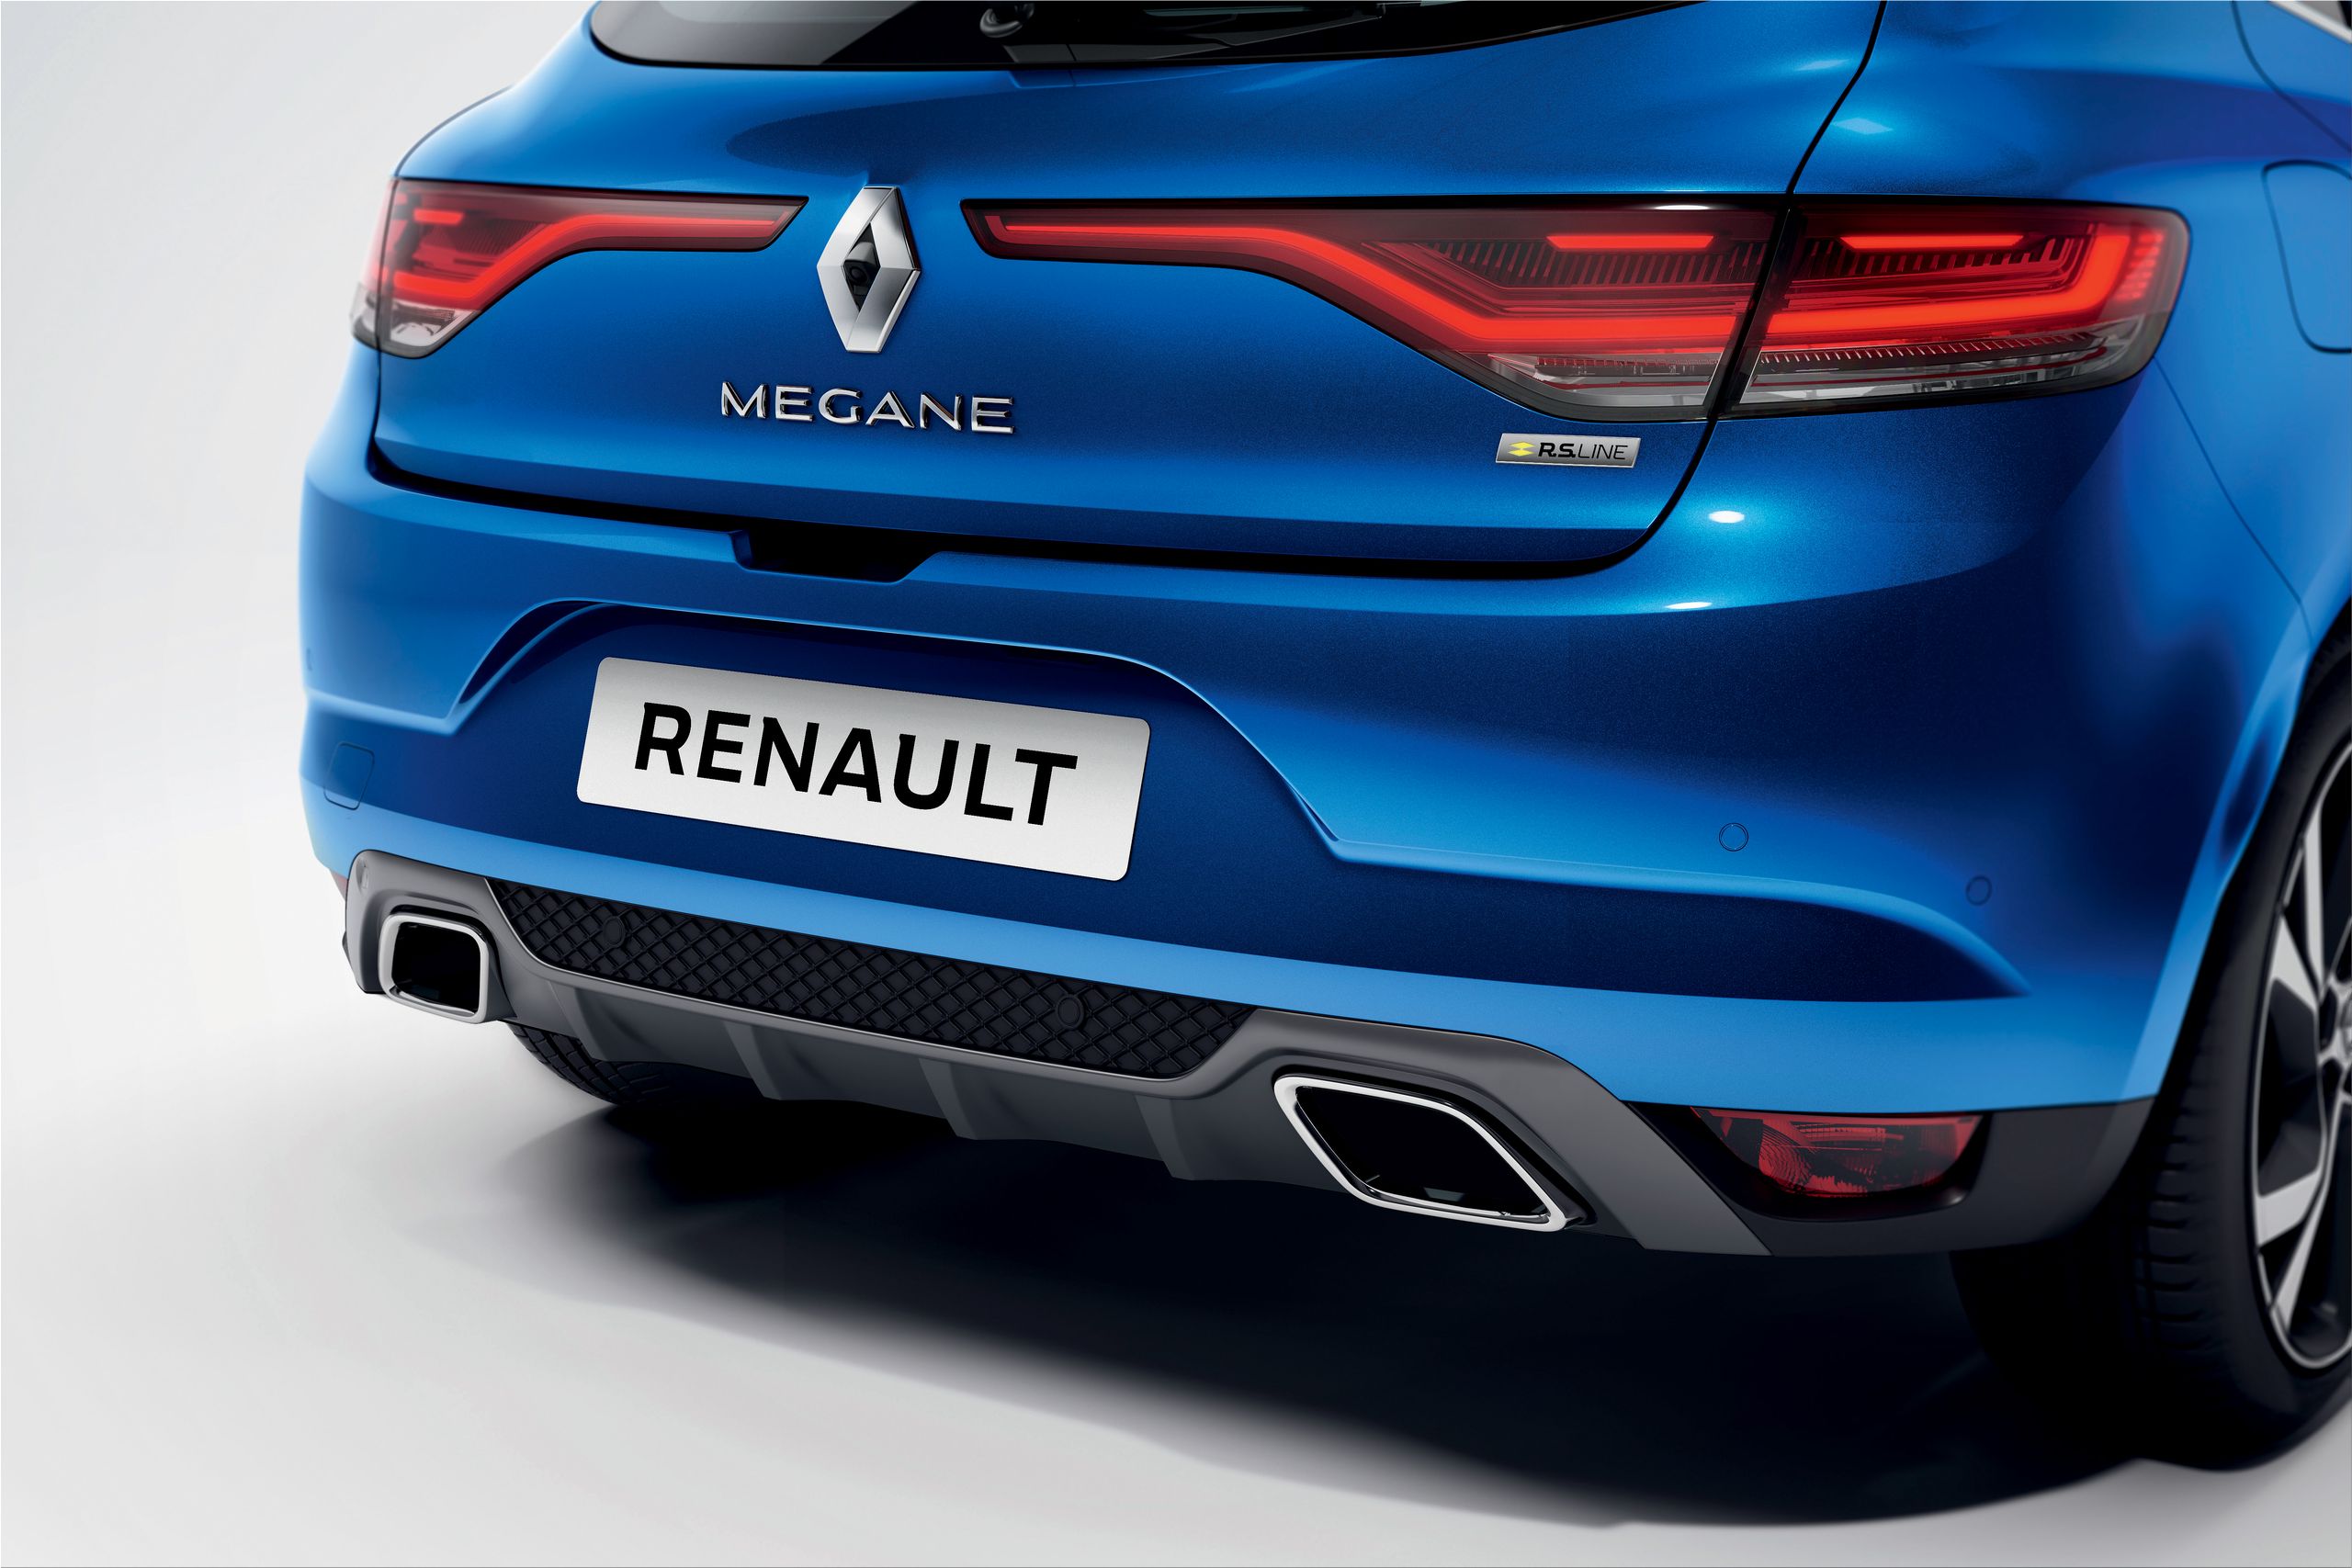 Unofficial prices for the Renault Megane IV